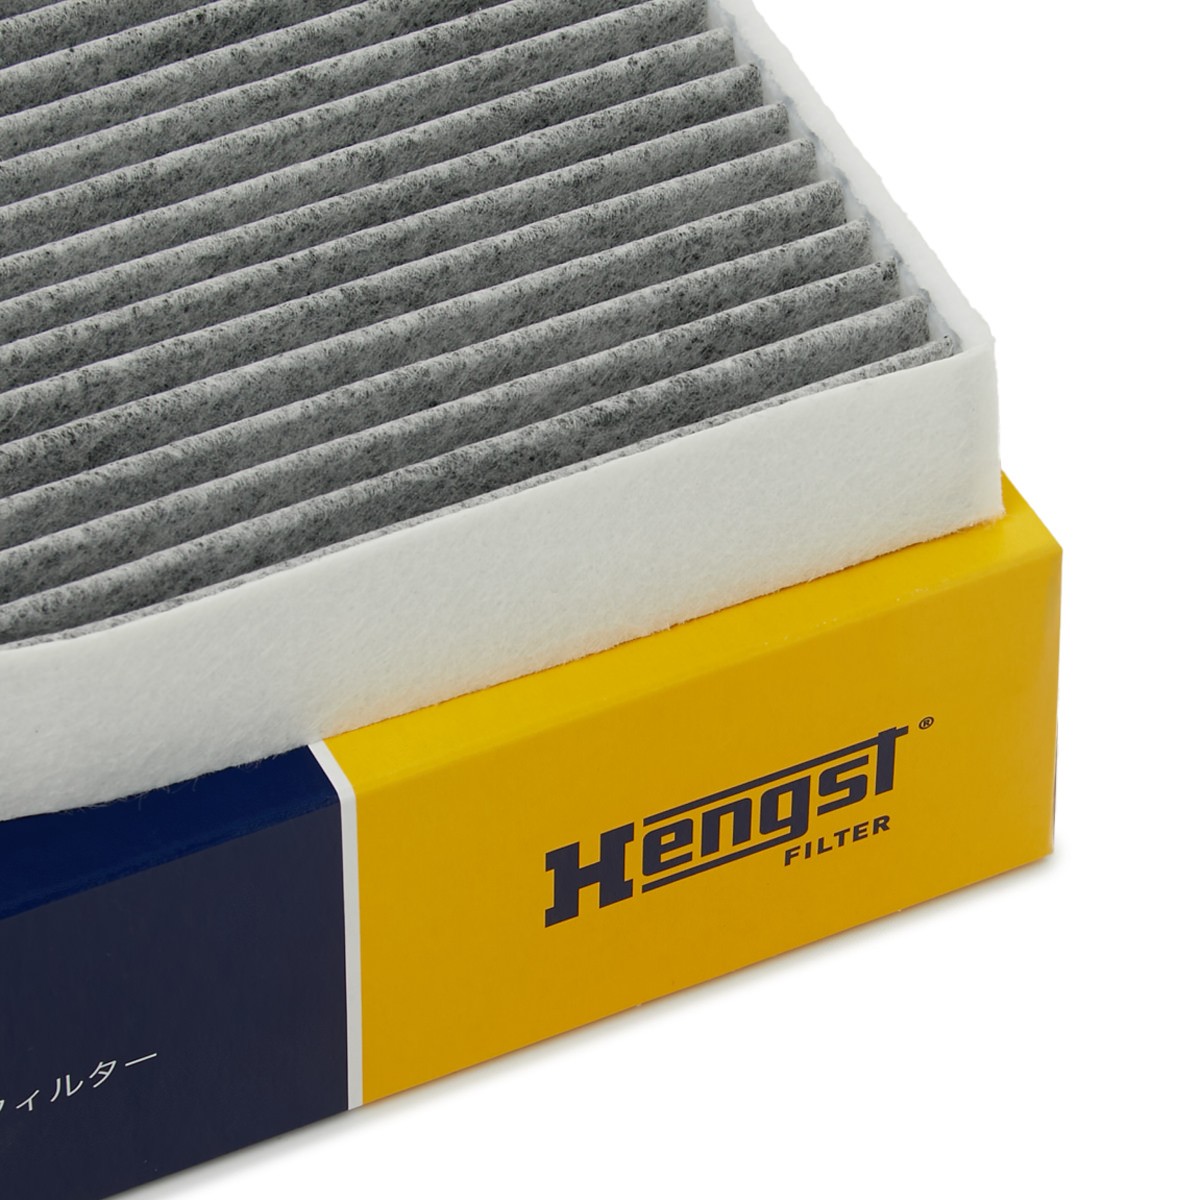 HENGST FILTER 6791310000 Air conditioner filter Activated Carbon Filter, 288 mm x 213 mm x 58 mm